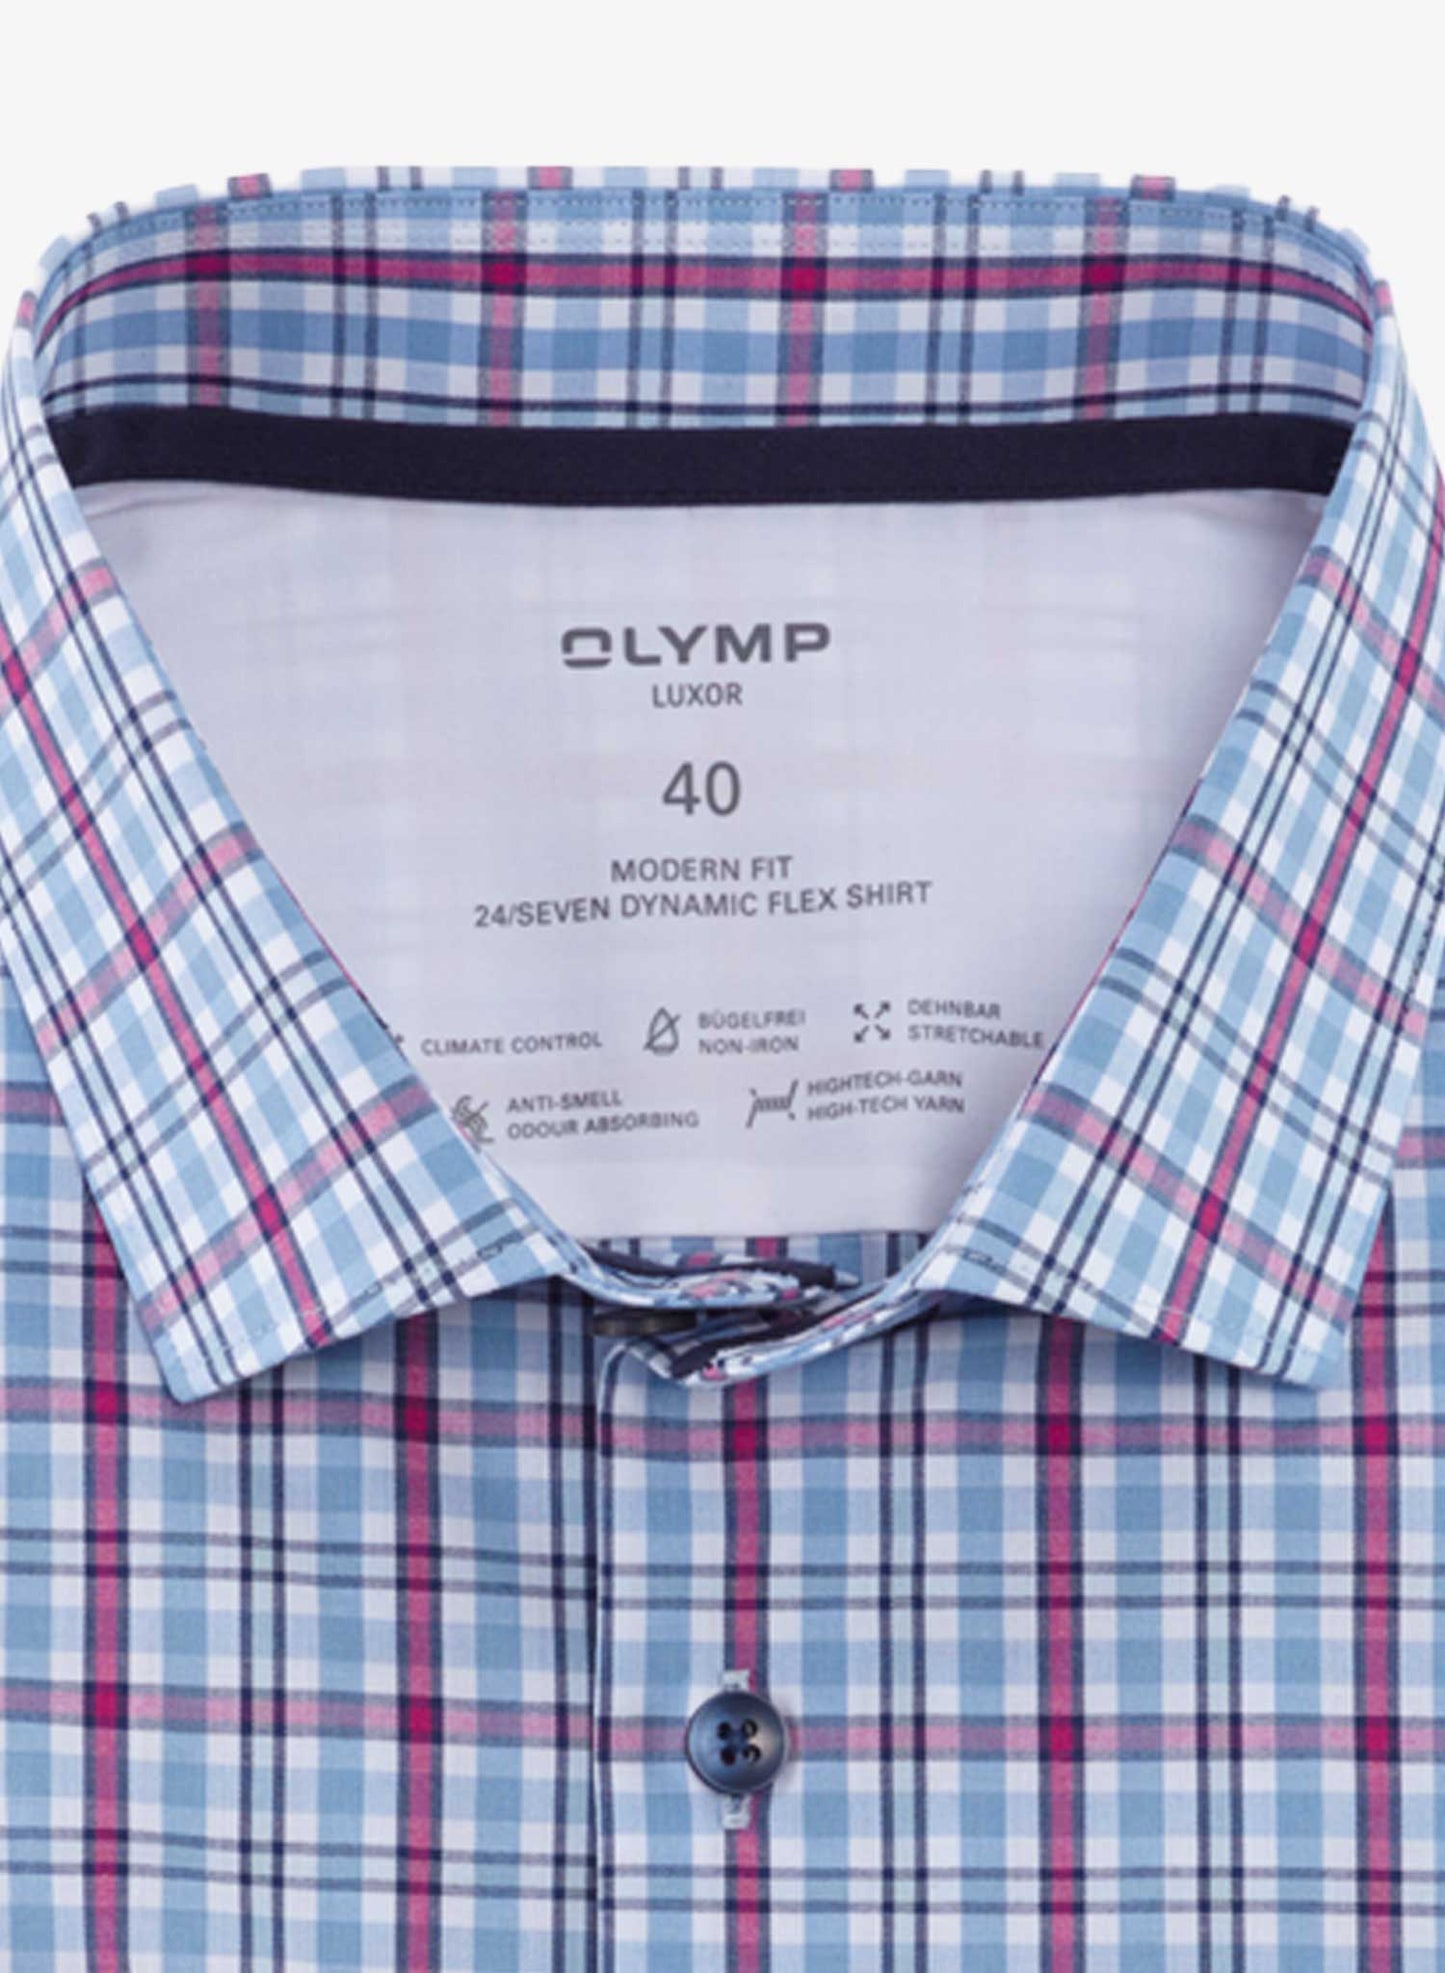 Olymp Blue Check Shirt Short Sleeve 24/Seven Cropped to show Collar